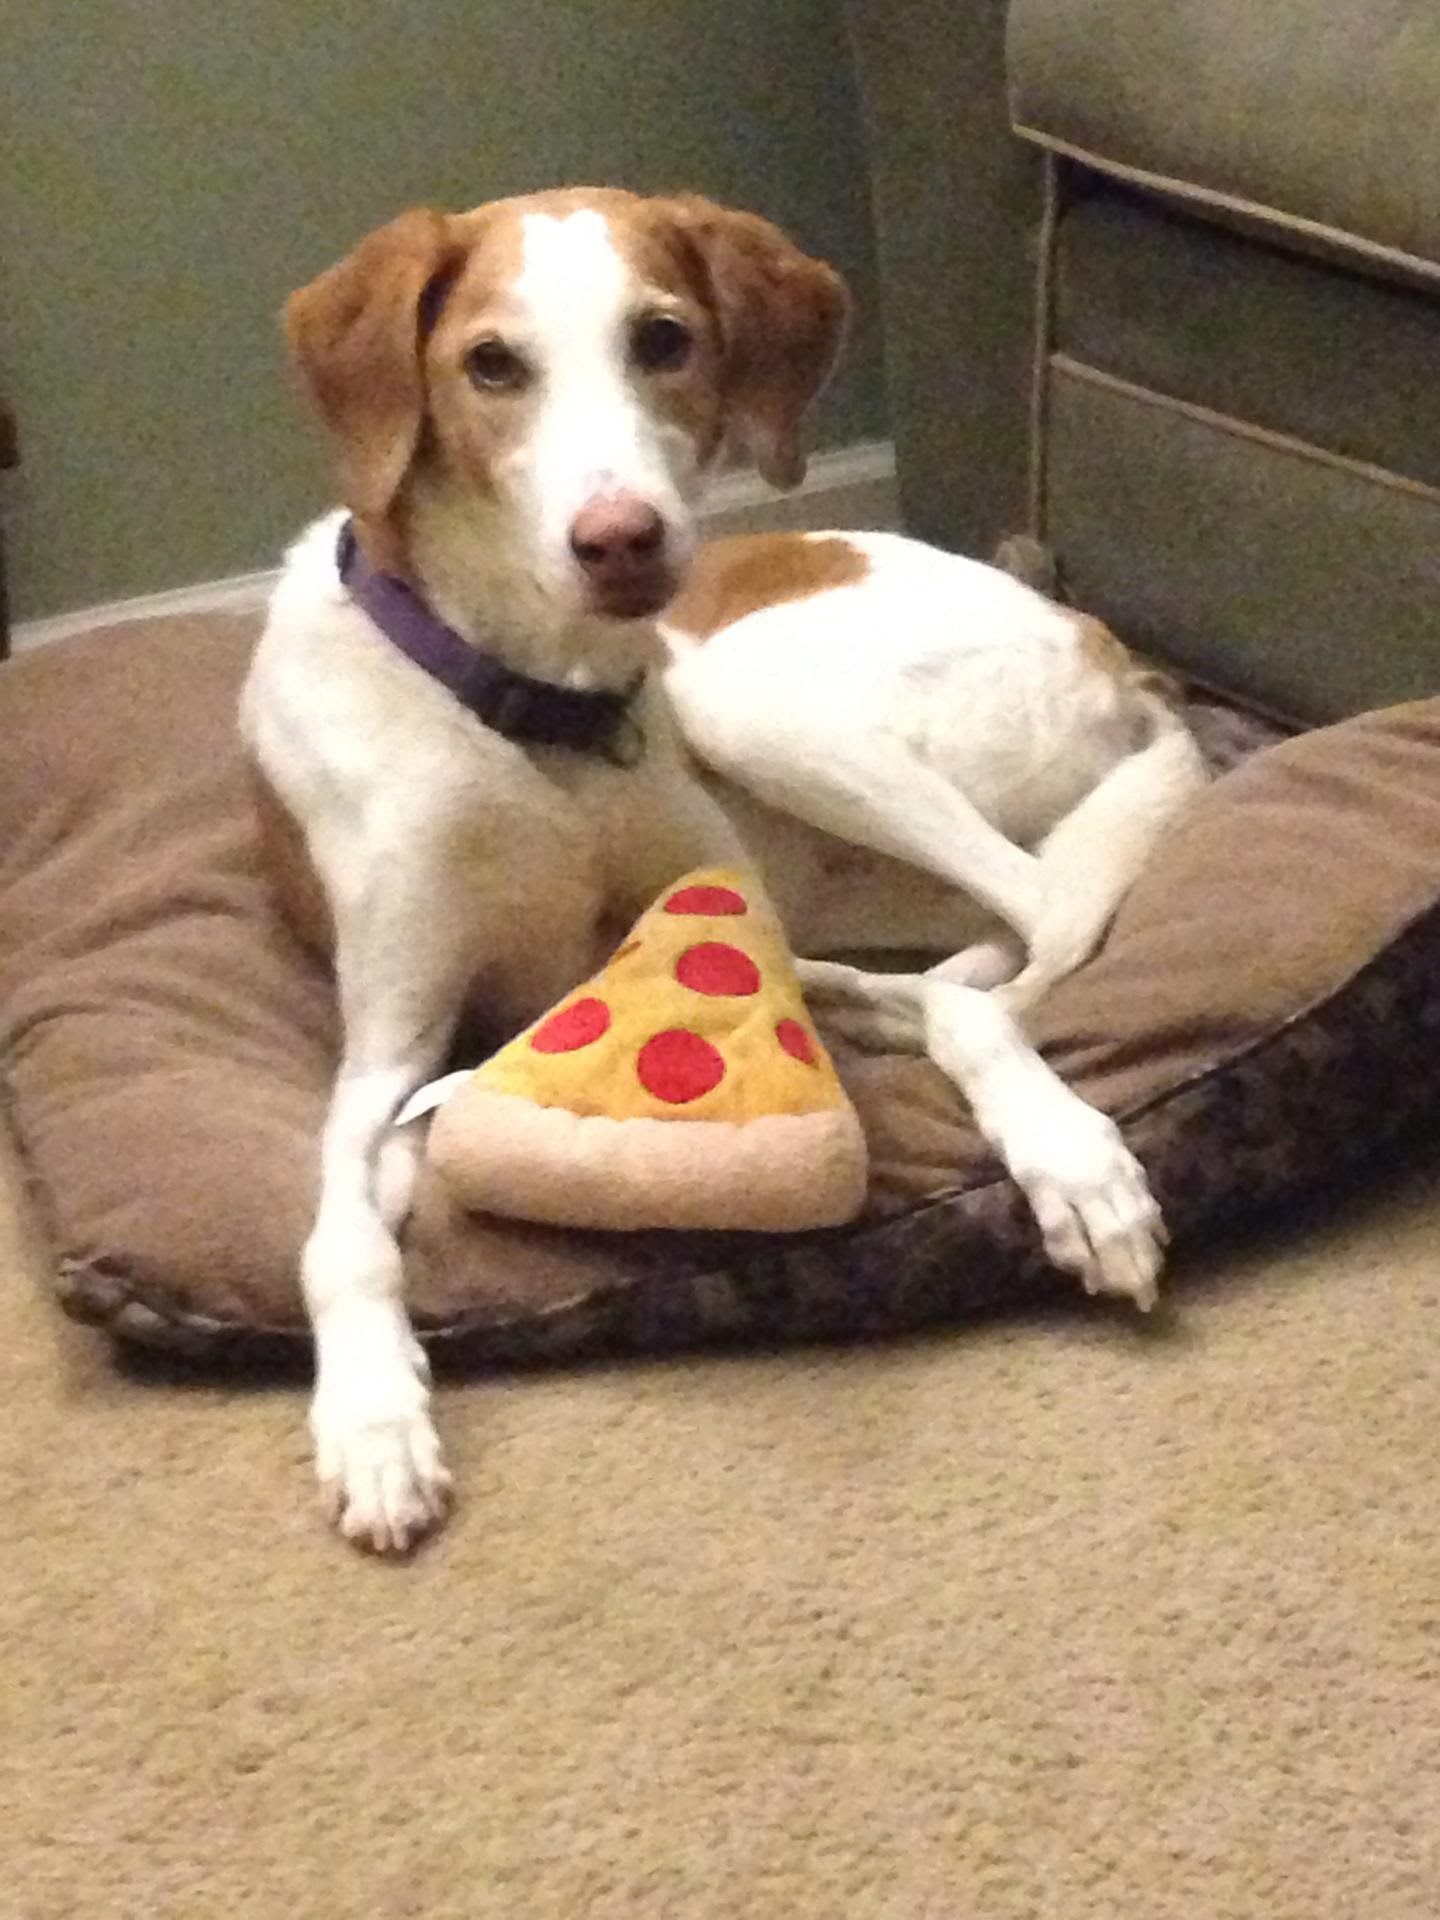 Gracie and her favorite pizza